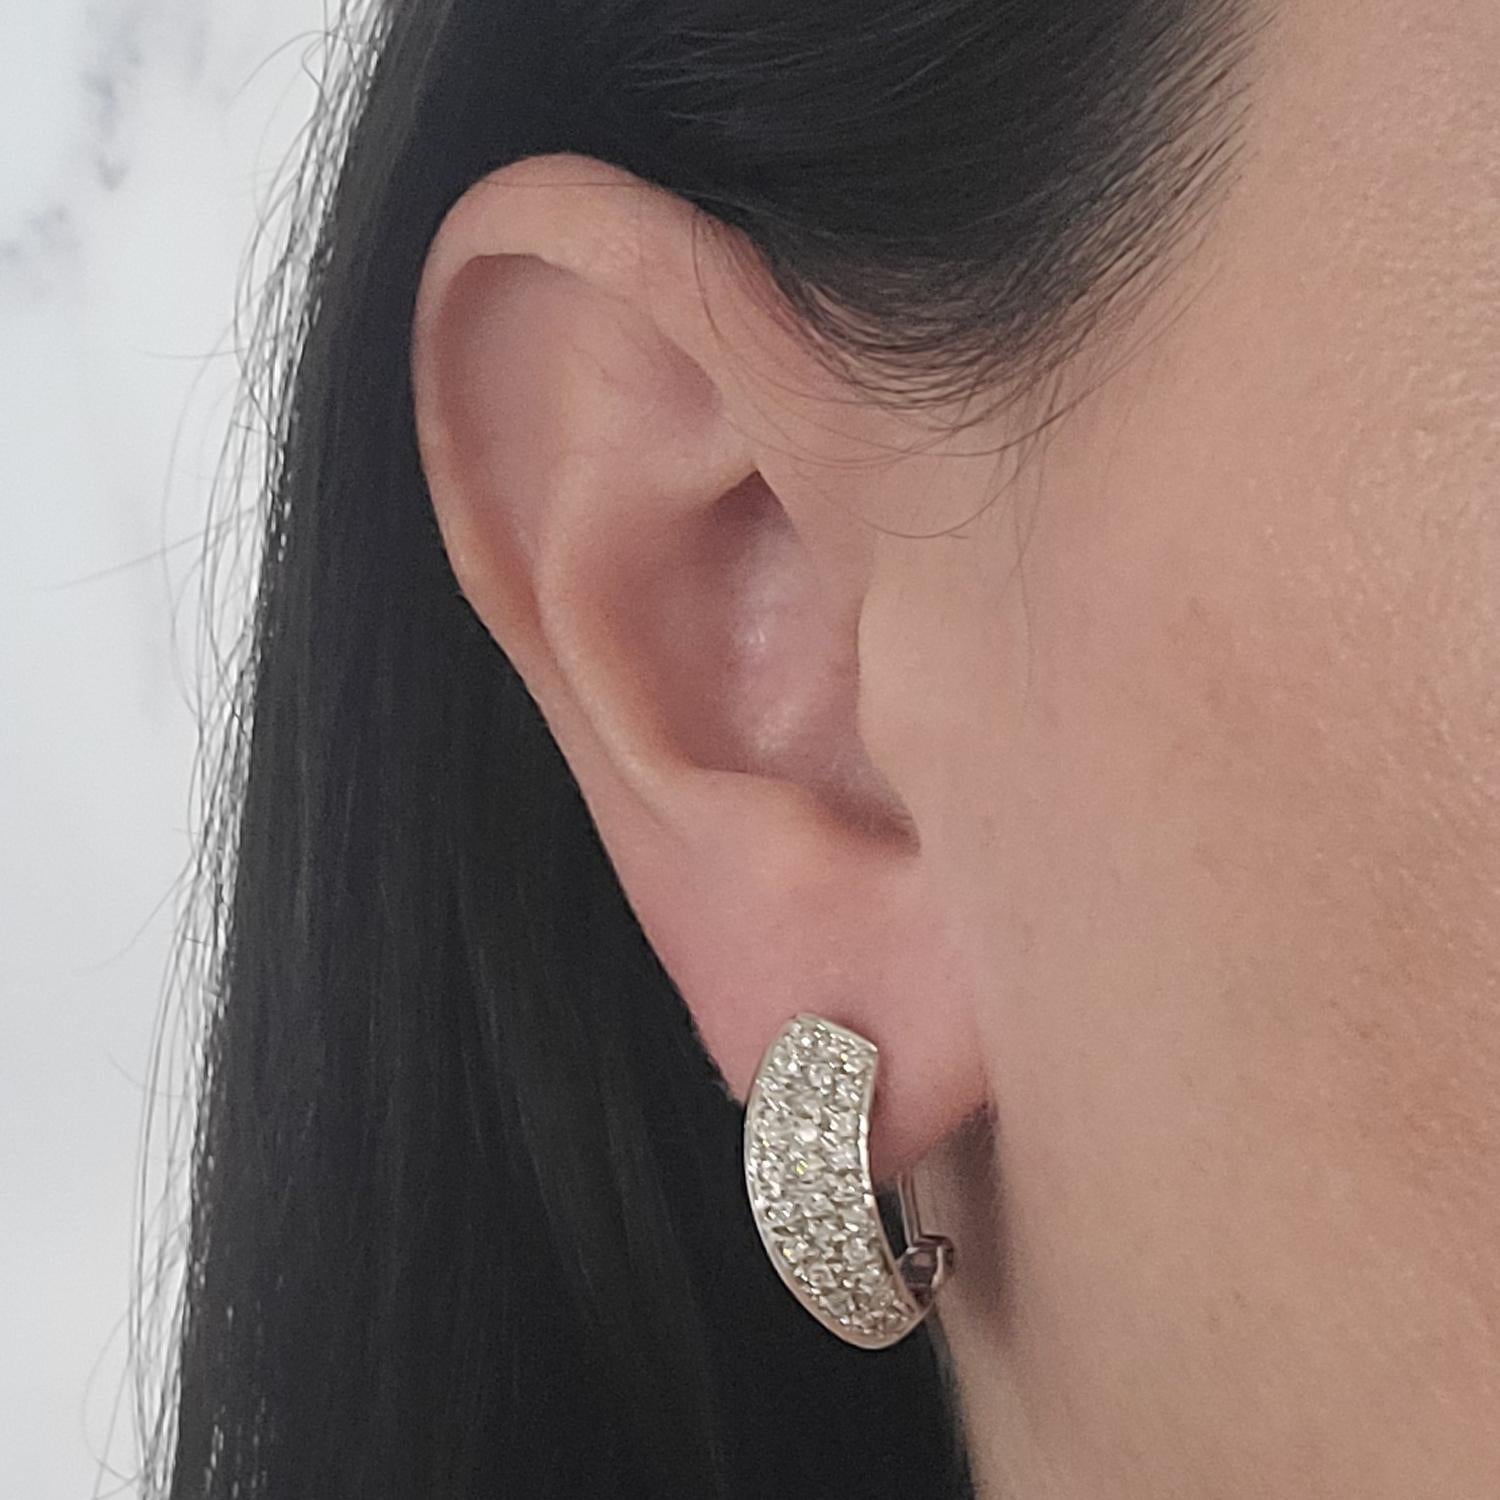 14 Karat White Gold Pave Hoop Earrings Featuring 54 Round Brilliant Cut Diamonds of SI Clarity and H Color Totaling Approximately 1.00 Carat. Pierced Post with Omega Clip Back. Finished Weight Is 6.8 Grams.